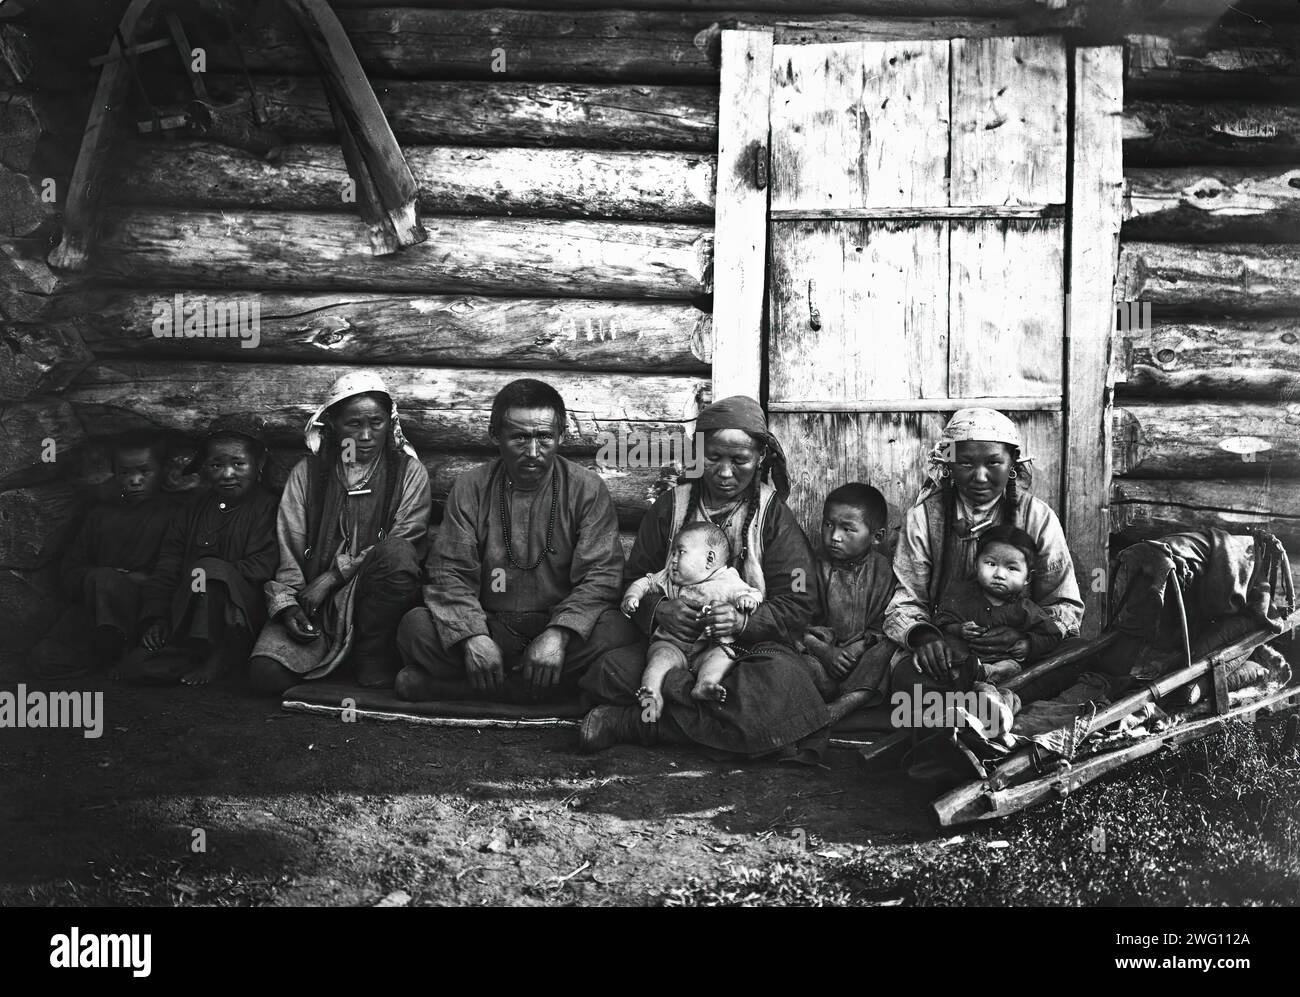 Yakut Family, 1890. The album &quot;Views of the Yakutsk Region&quot; contains 151 photographs. Subjects include the Lena River shore; various forms of river transport--including boats, rafts, trade barges, and steamships; post offices along the Lena highway, and transport by horse and reindeer. Several of the photographs are signed with the initials &quot;I. P.&quot; Irkutsk State University Stock Photo